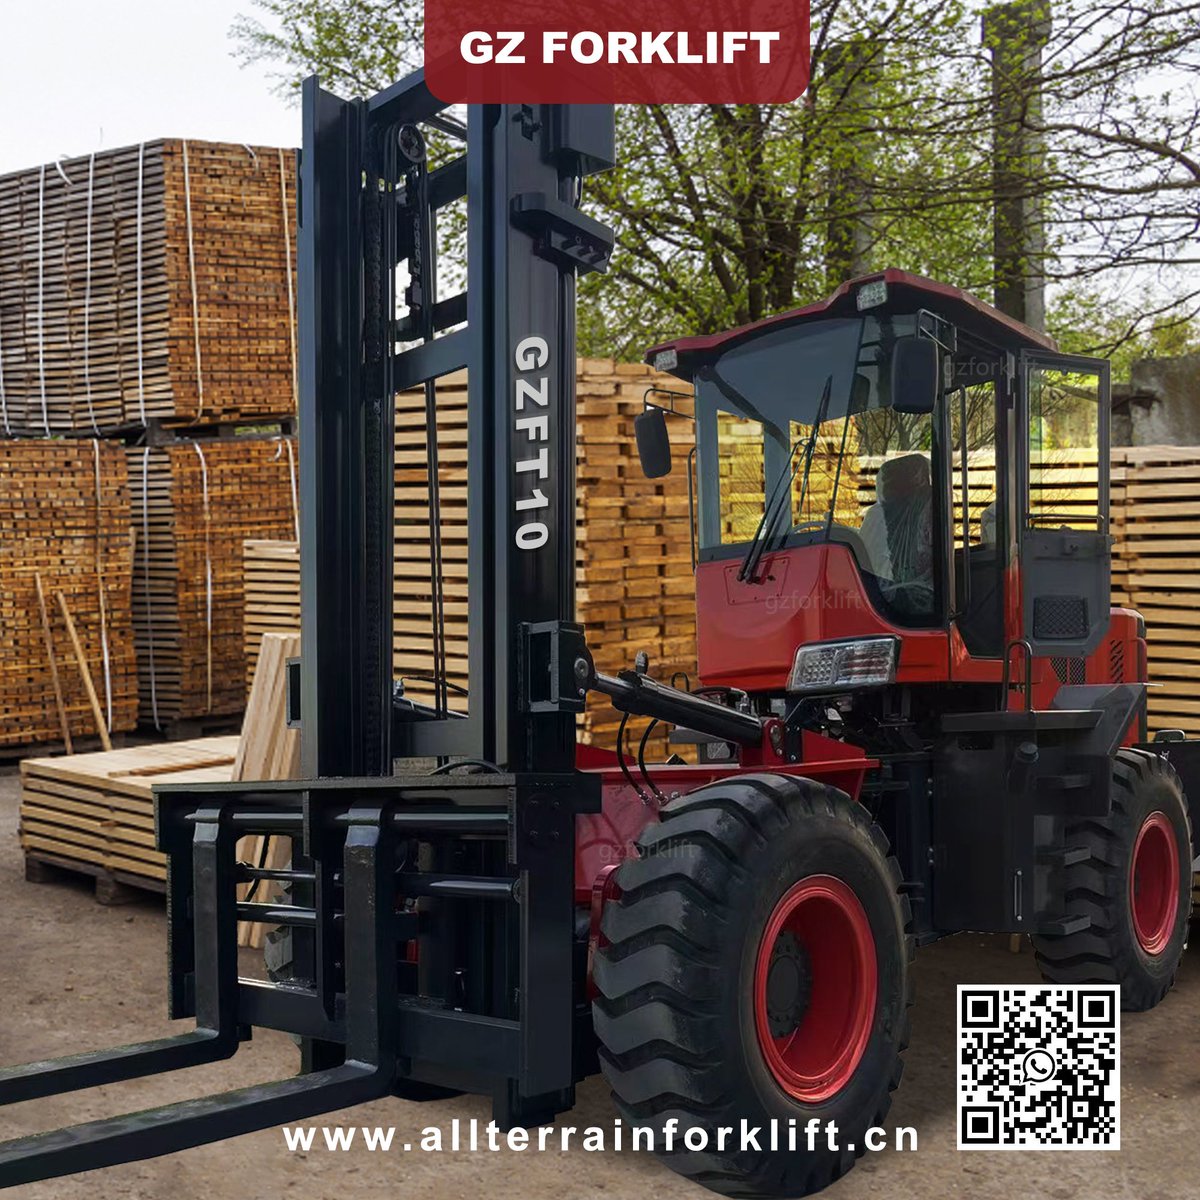 📣Rough Terrain Forklift
✅10 Ton/4-Wheel Drive/Diesel Engine
✅Overall Size(L/W/H): 6350x2150x3450mm
✅Engine(Brand optional): 115kw
✅Tyre: Pneumatic Tyre 17.5-25
📲More information, pls whatsapp 86 13053557263
🌐allterrainforklift.cn
#RoughTerrainForklift #ForkliftTruck